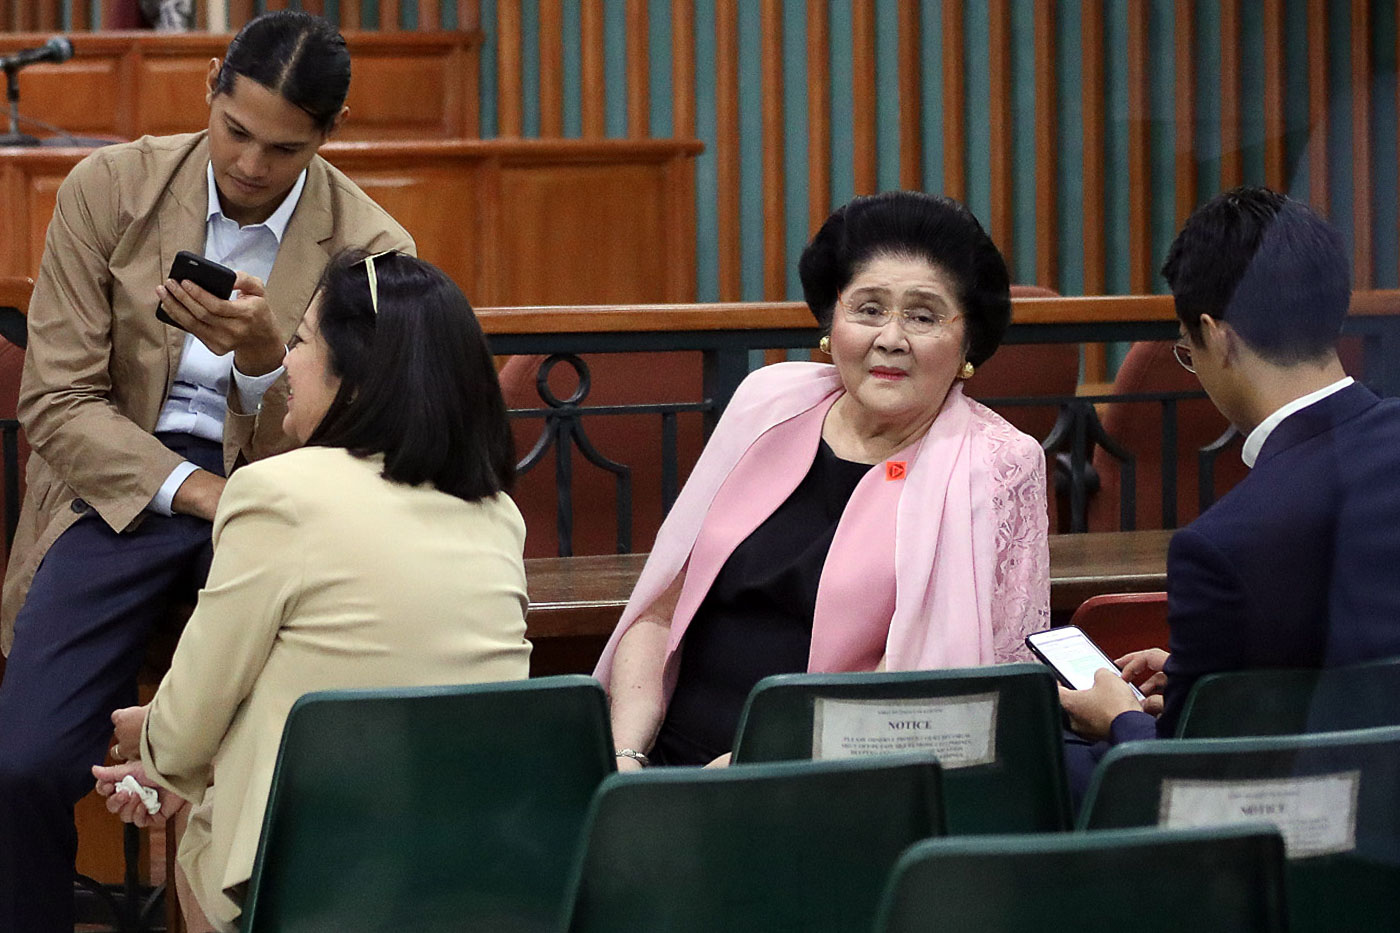 OLD AGE. Ilocos Norte 2nd District Representative Imelda Marcos is granted bail post-conviction partly due to her old age. Photo by Darren Langit/Rappler 